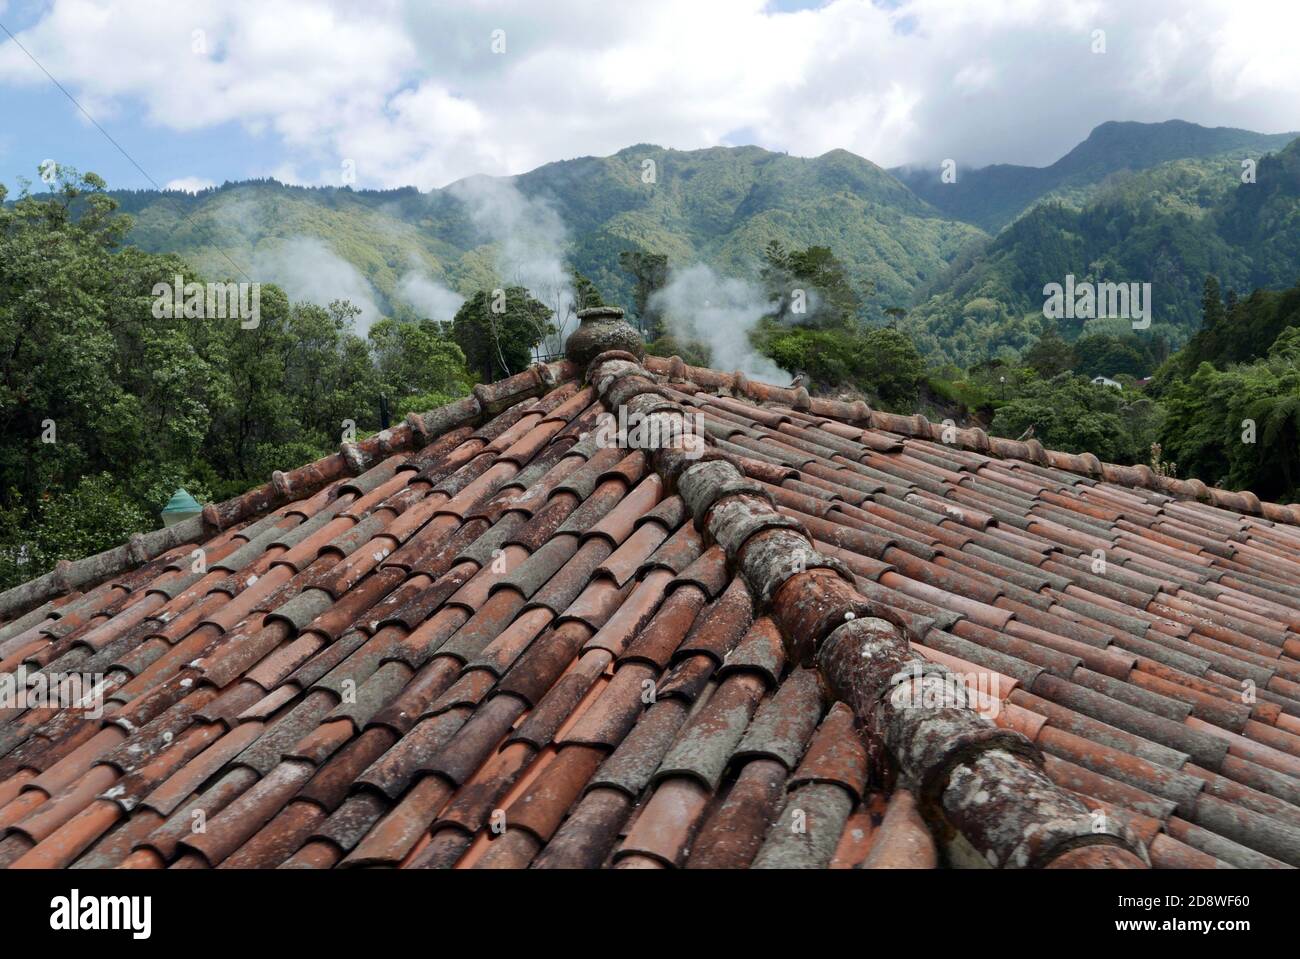 Steam from hot springs rising over tiled Portuguese style roofs in Furnos  on the island of San Miguel  in the Azores. Stock Photo